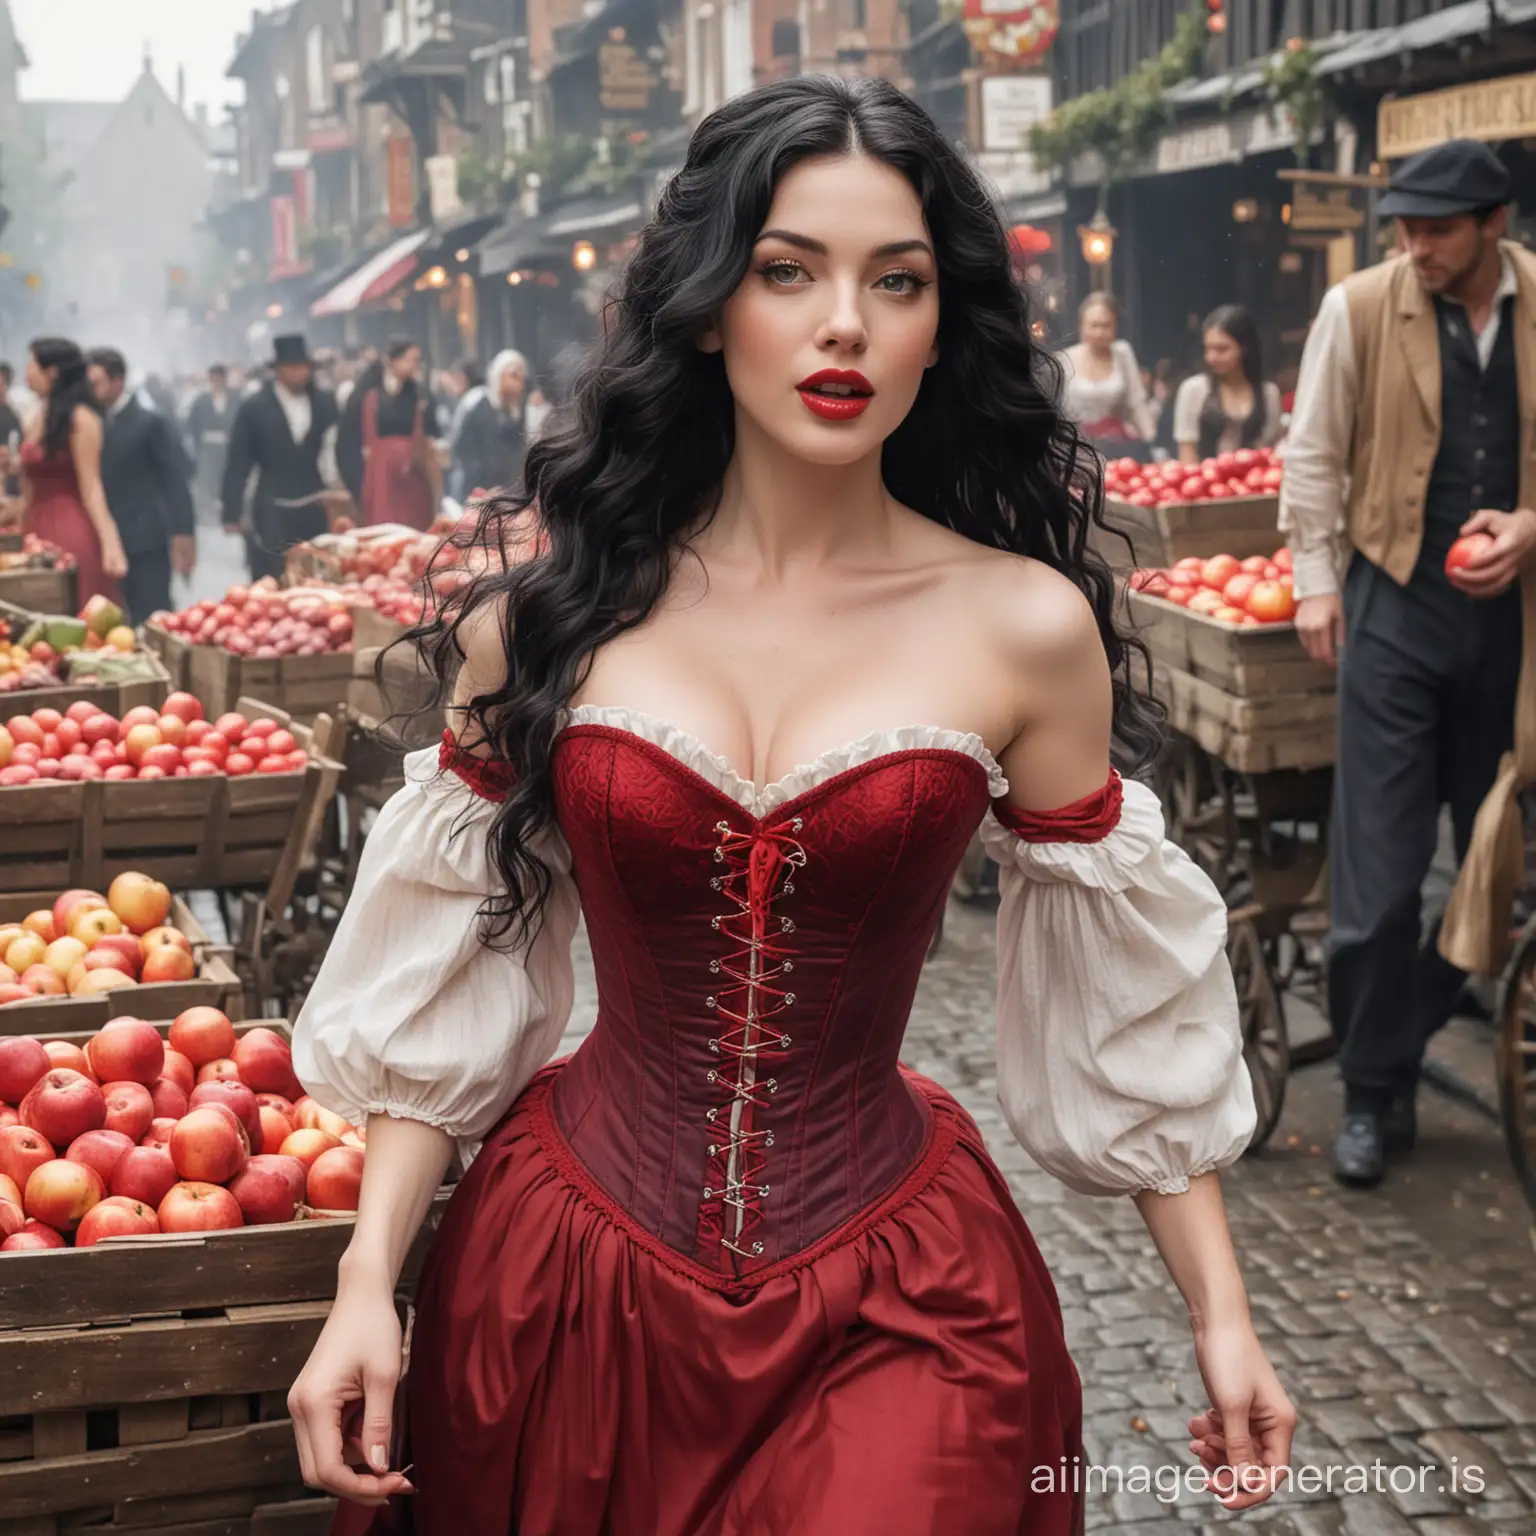 Beautiful woman with long black hair in loose curls, with pale skin and red lips, wearing a red corset and bodice running from a man in a crowded market, while holding a red apple, market vendors selling their wares from old wooden carts in foggy London 1888